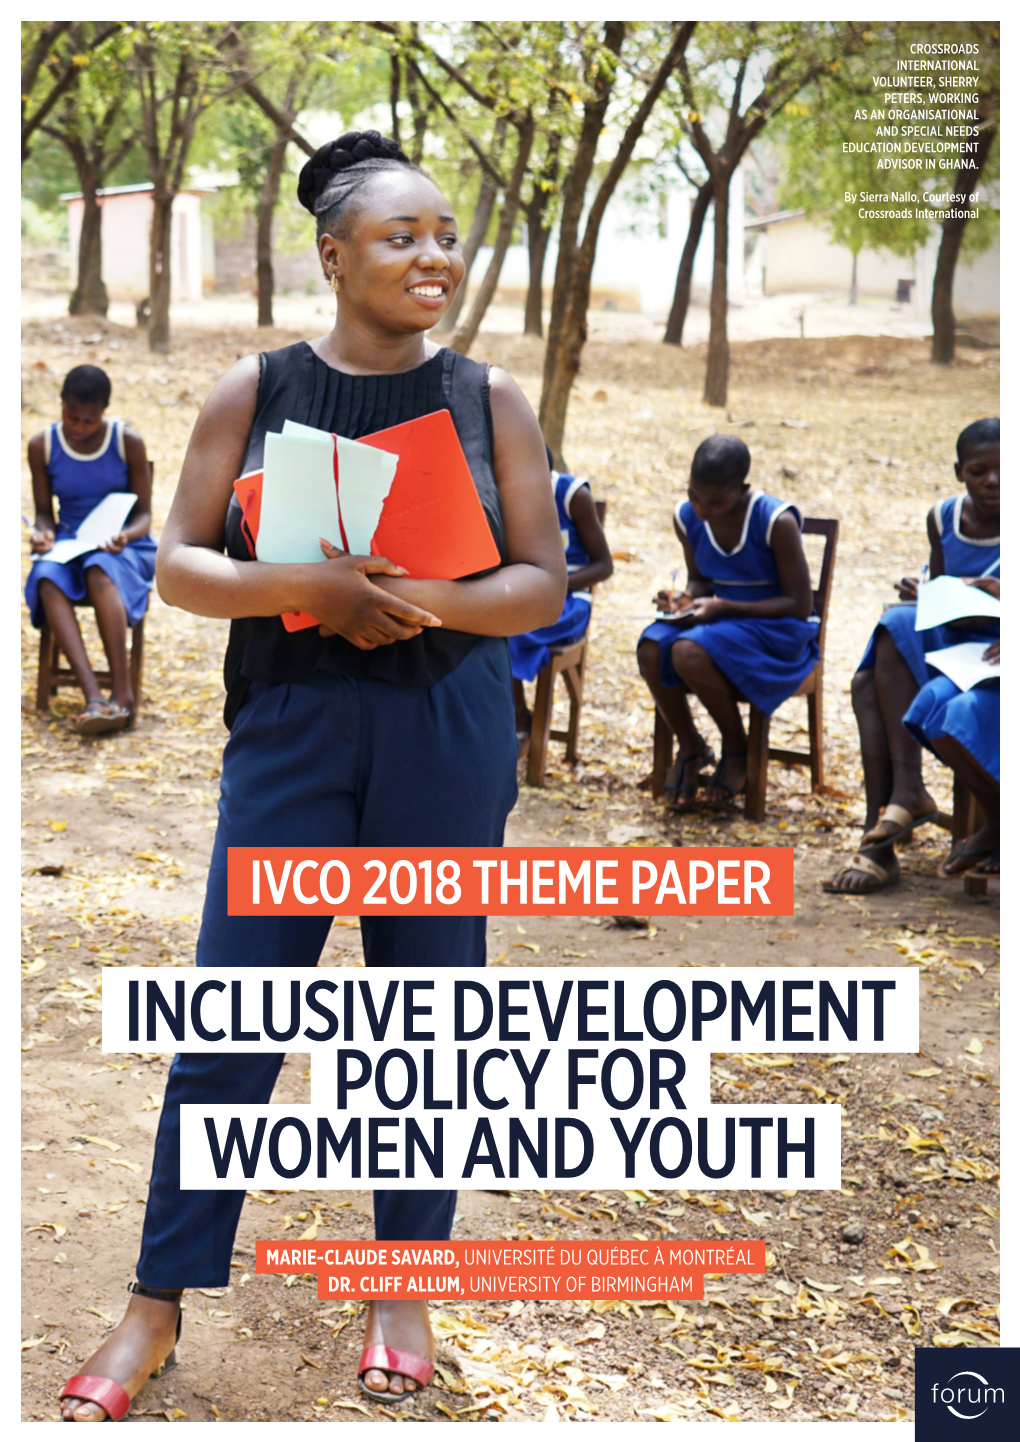 Inclusive Development Policy for Women and Youth